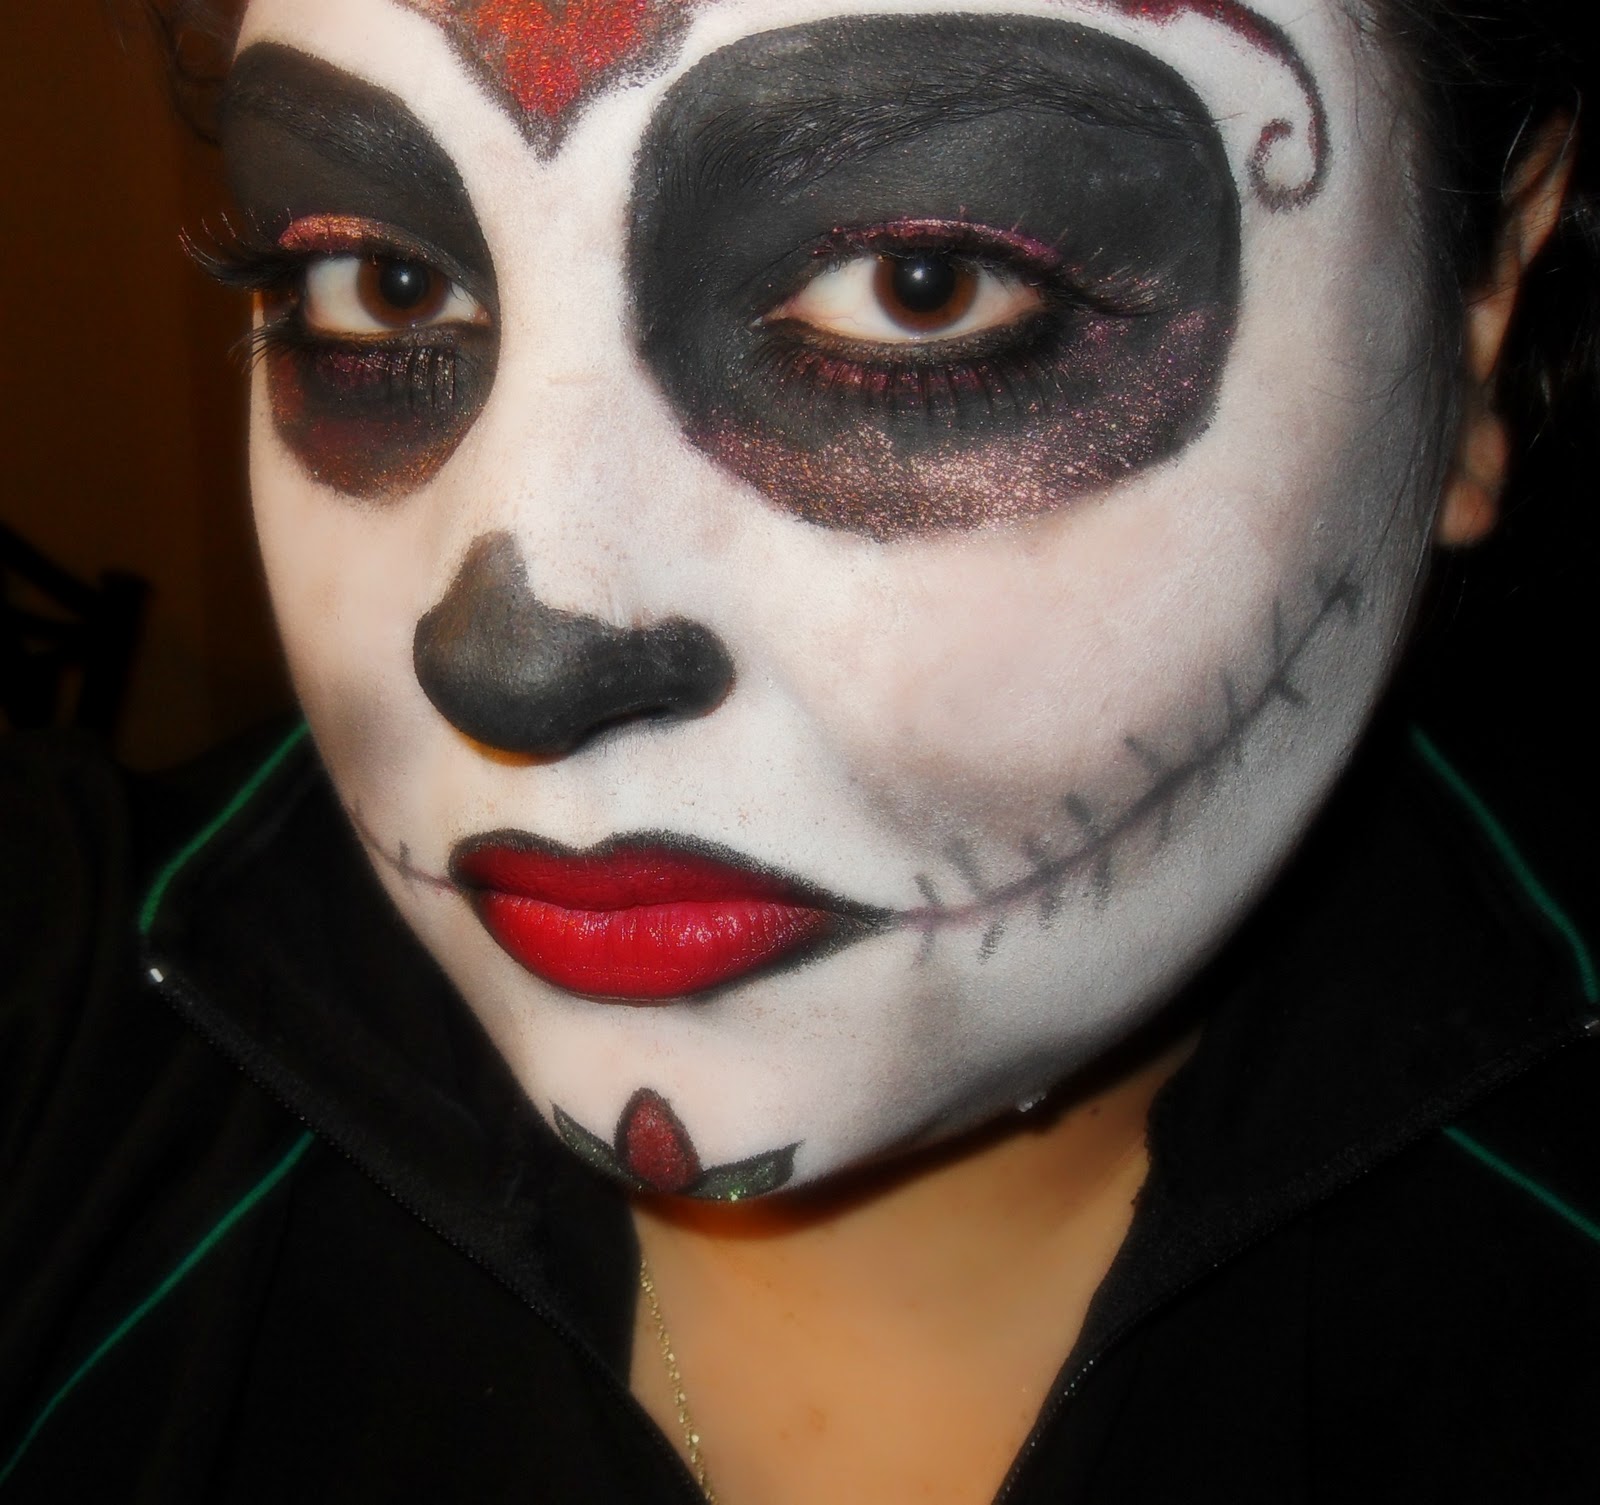 A LiTTLE OF THiS - A LiTTLE OF THAT: Sugar Skull :]